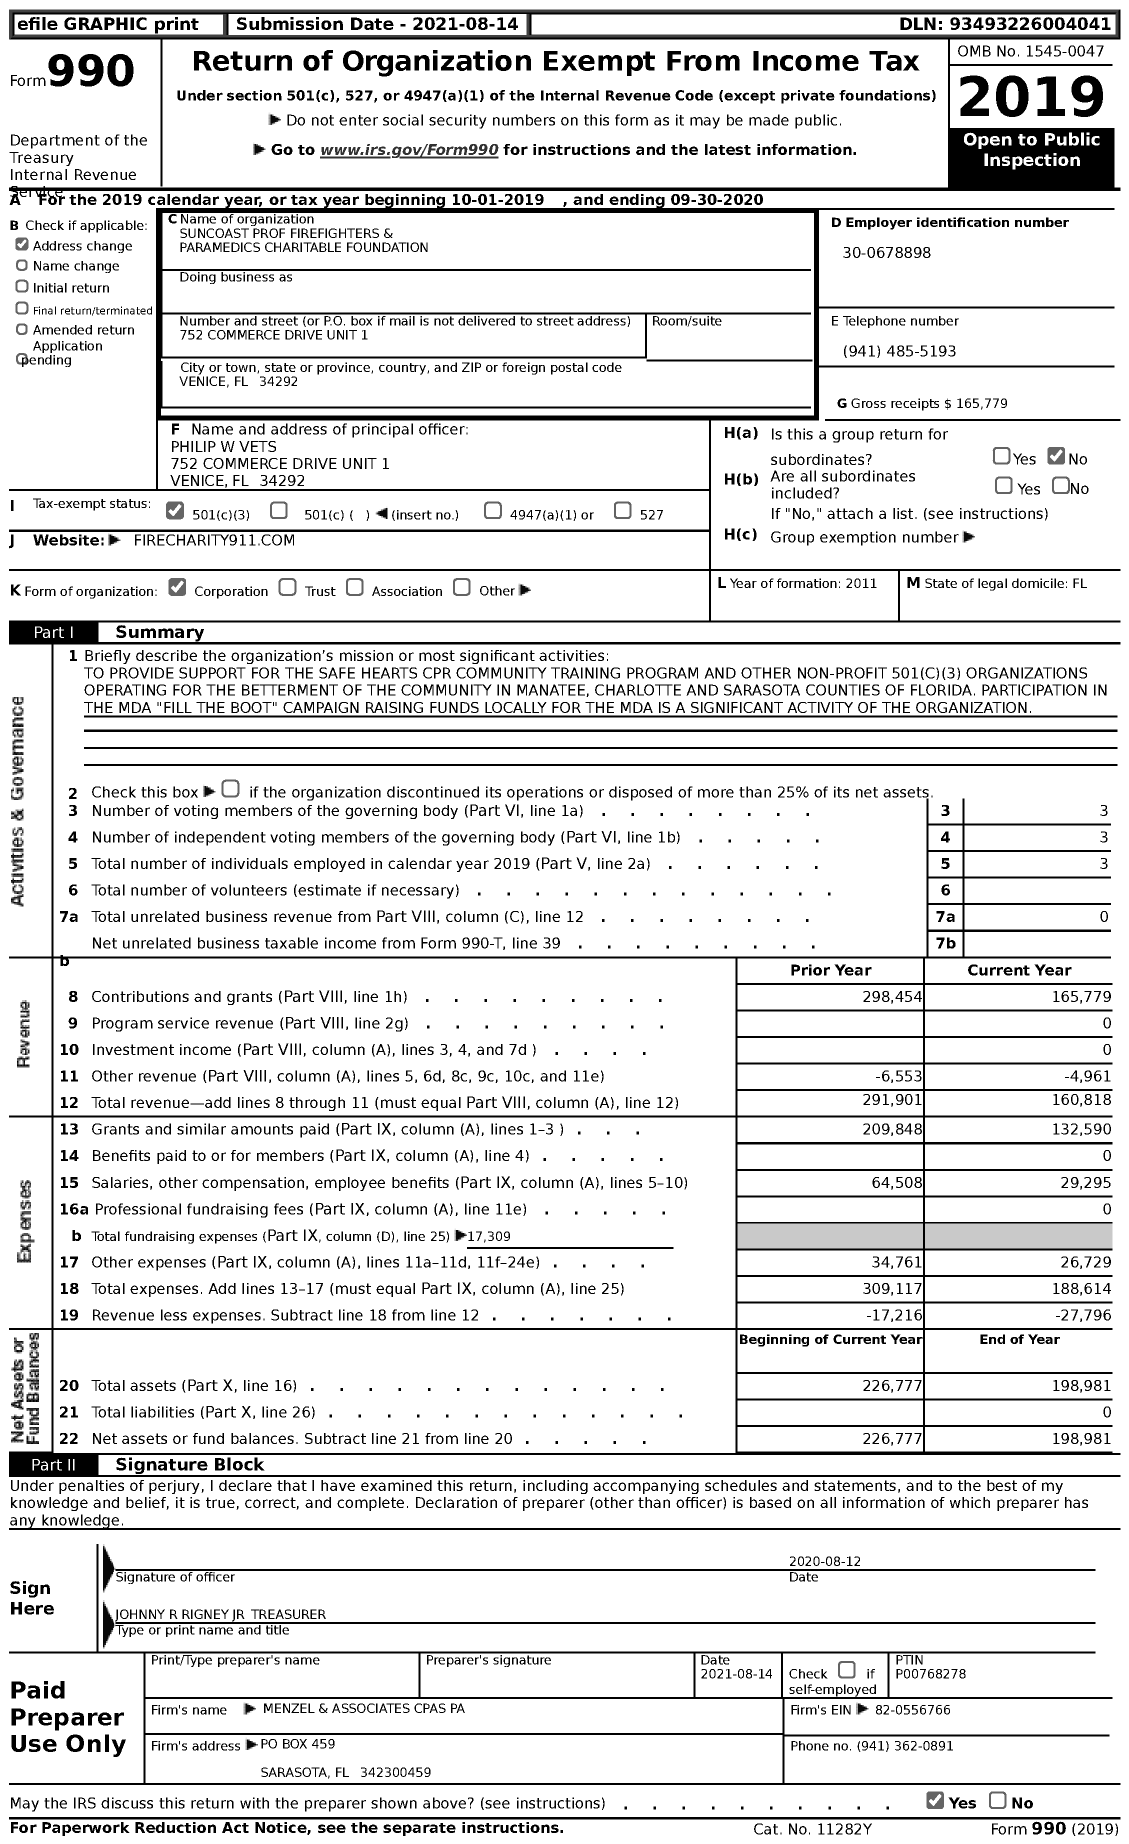 Image of first page of 2019 Form 990 for Suncoast Prof Firefighters and Paramedics Charitable Foundation